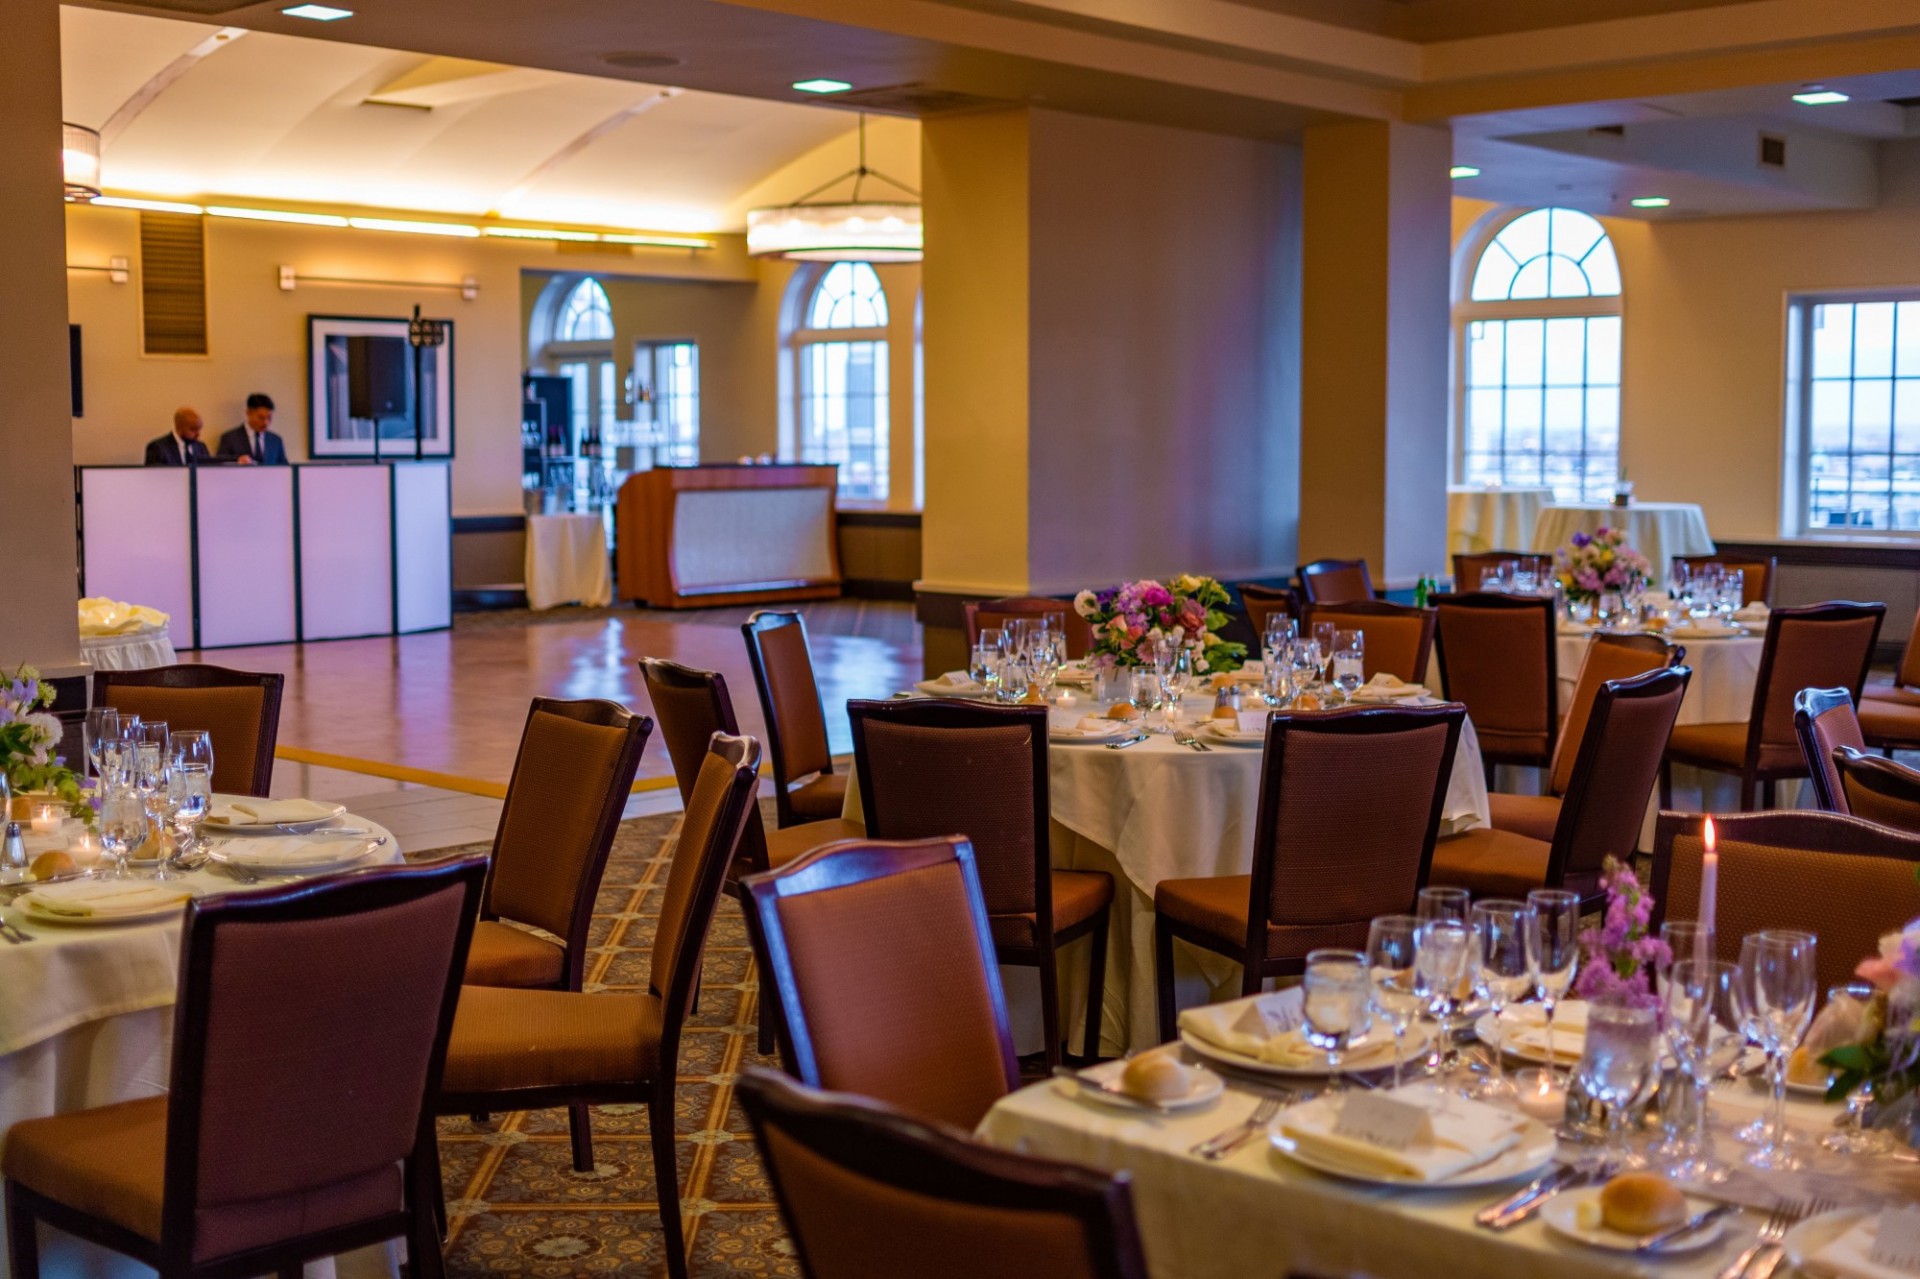 The Skyline Dining Room set for a wedding reception